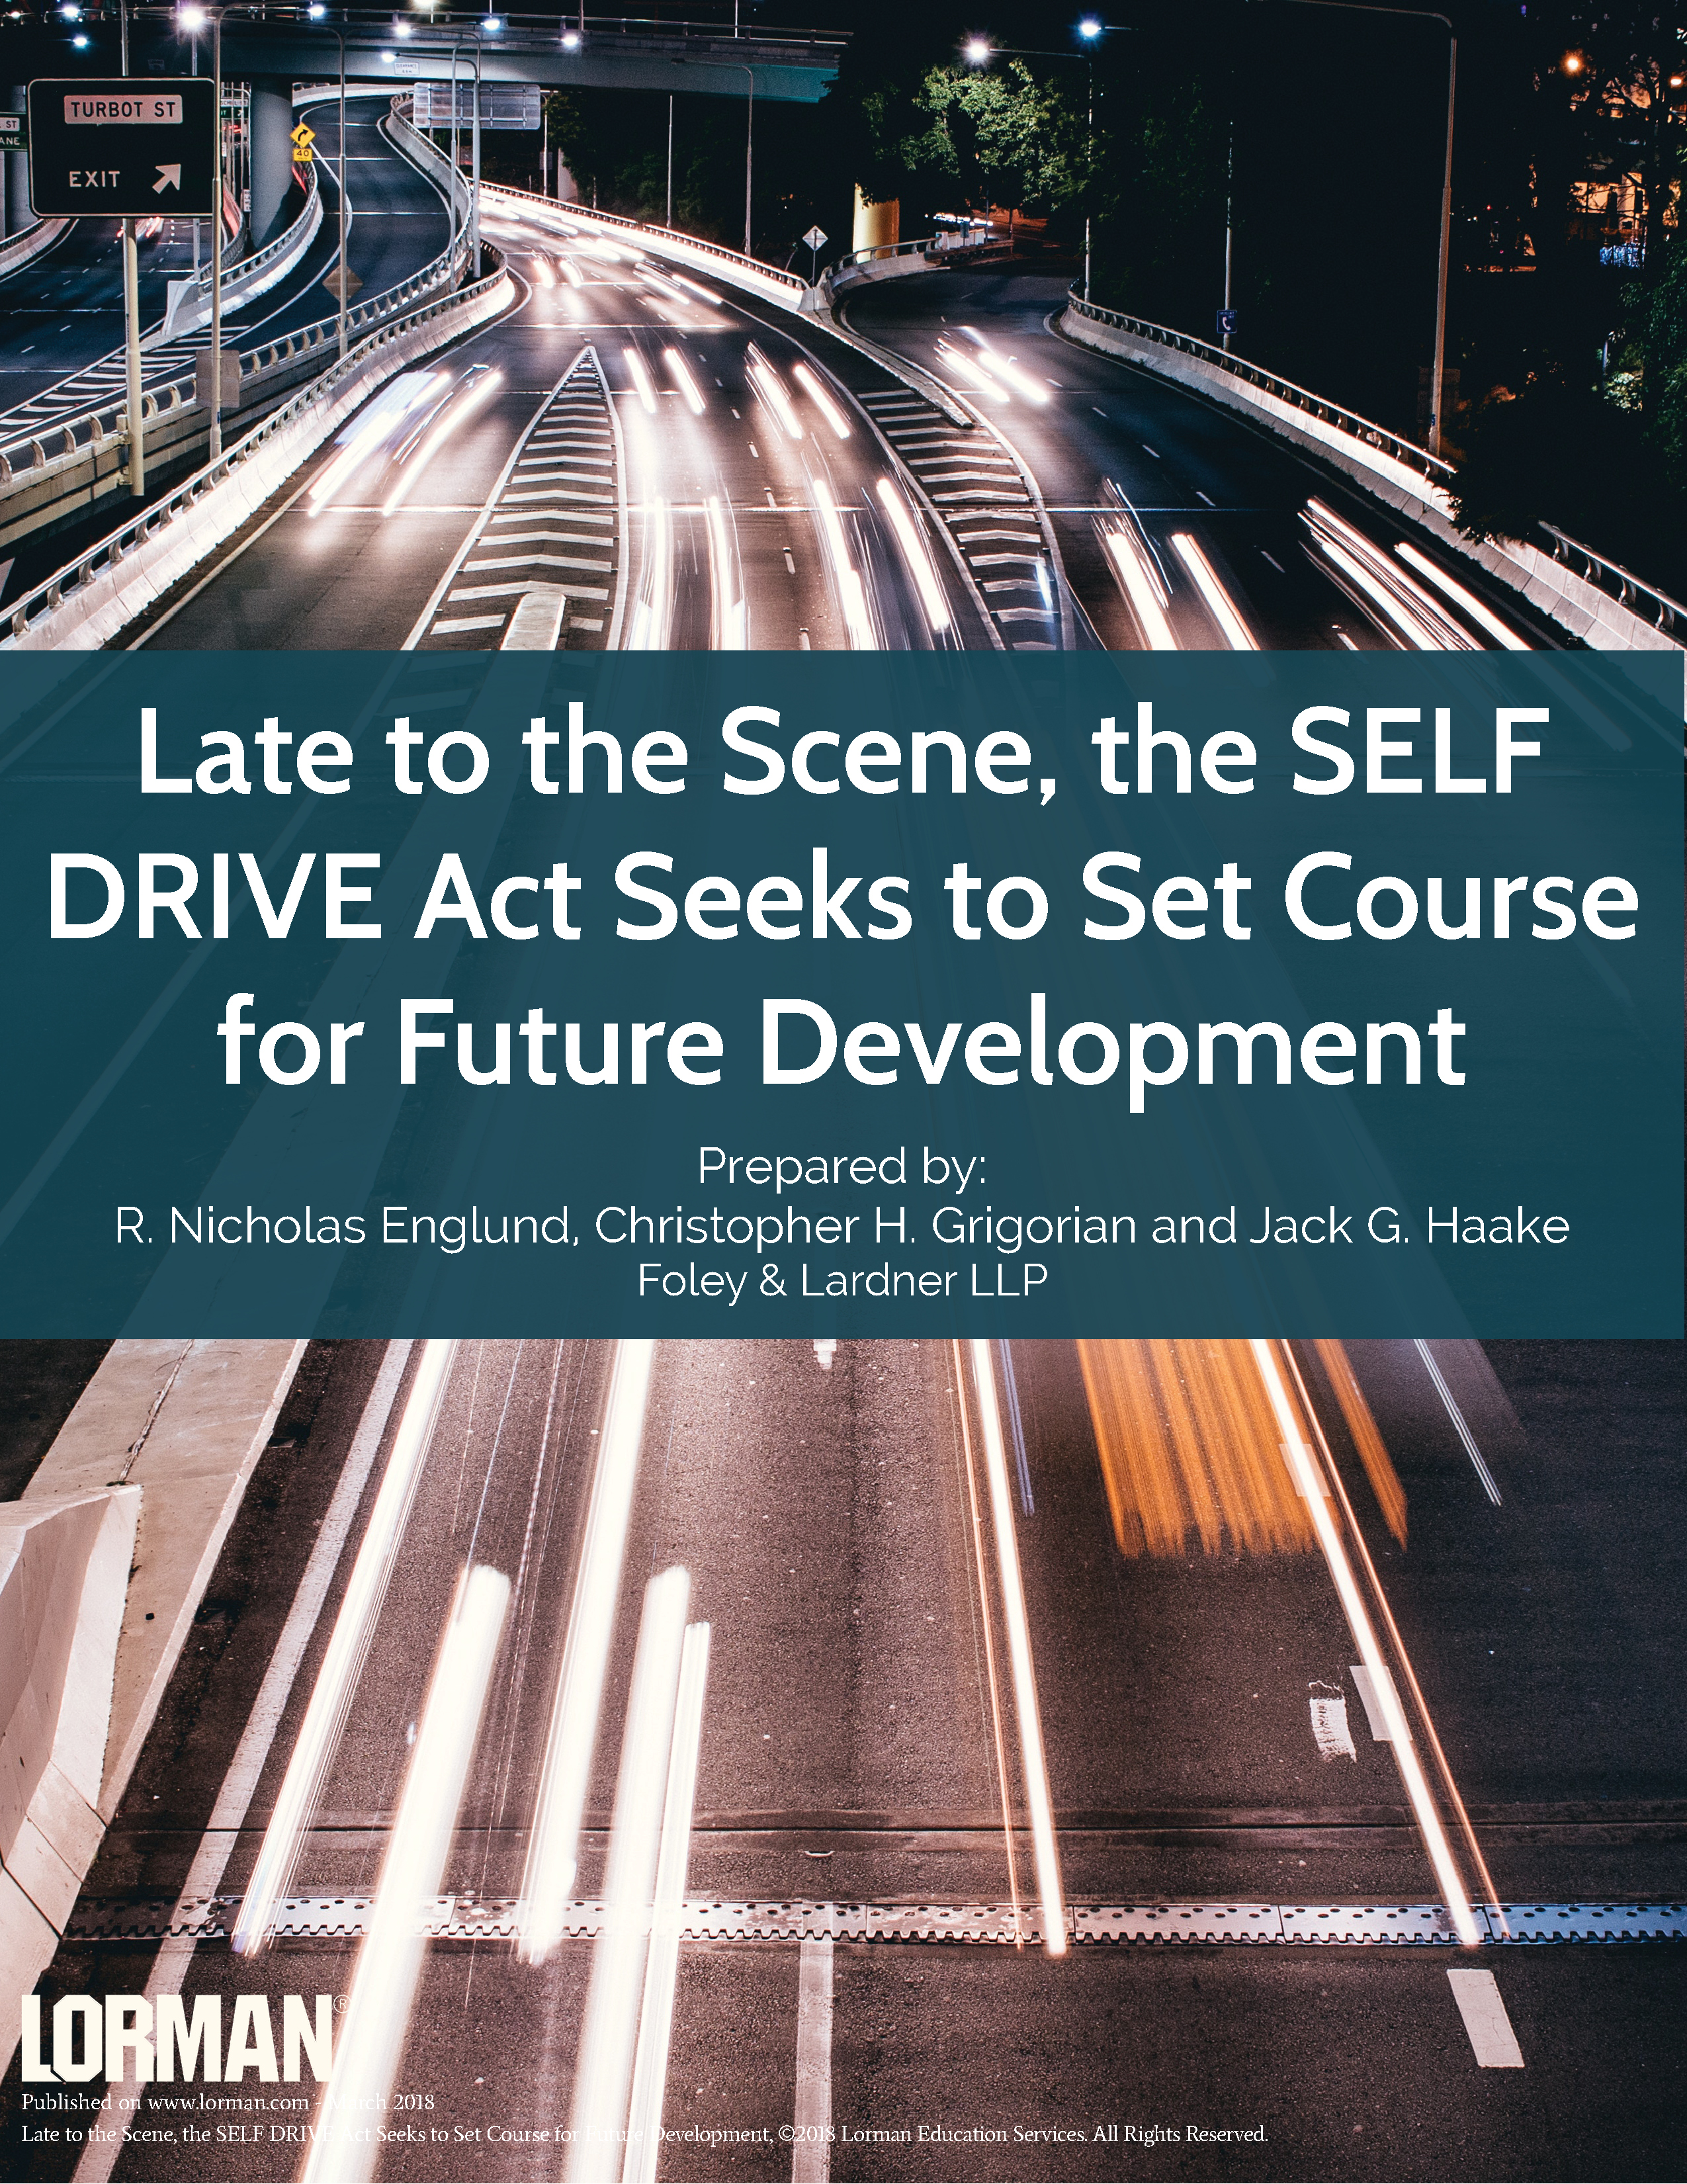 Late to the Scene, the SELF DRIVE Act Seeks to Set Course for Future Development